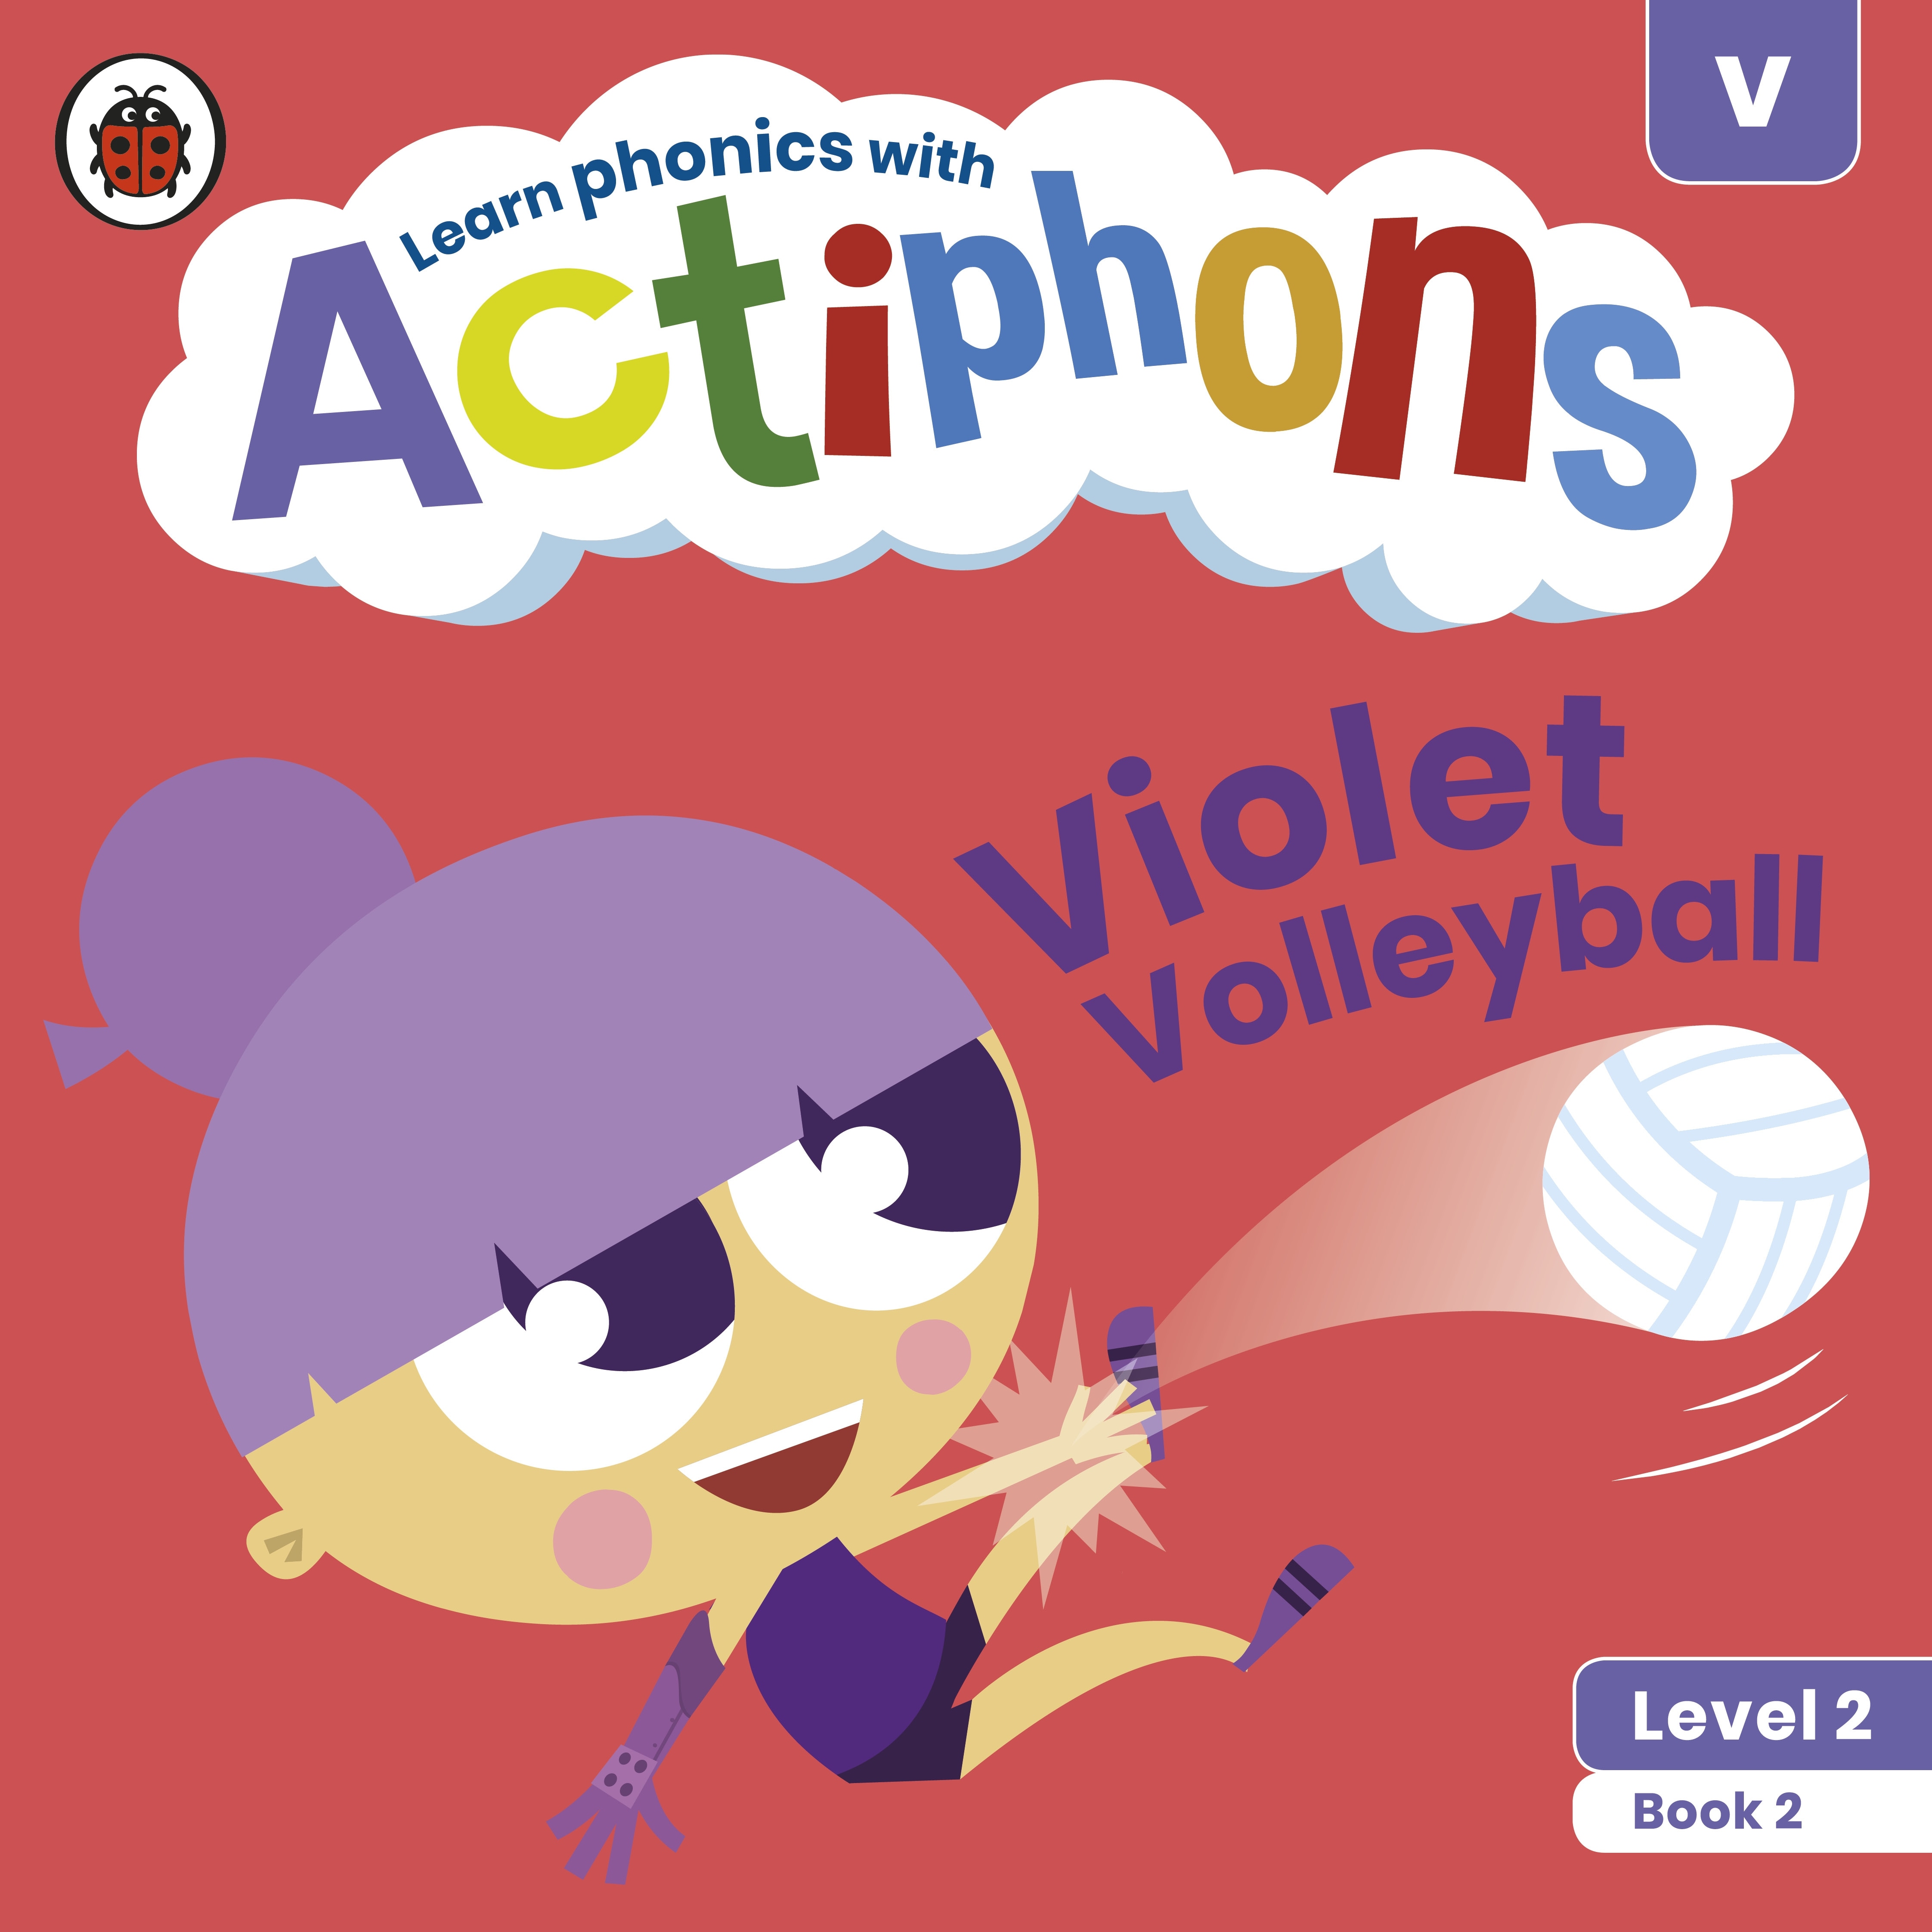 Actiphons Level 2 Book 2 Violet Volleyball